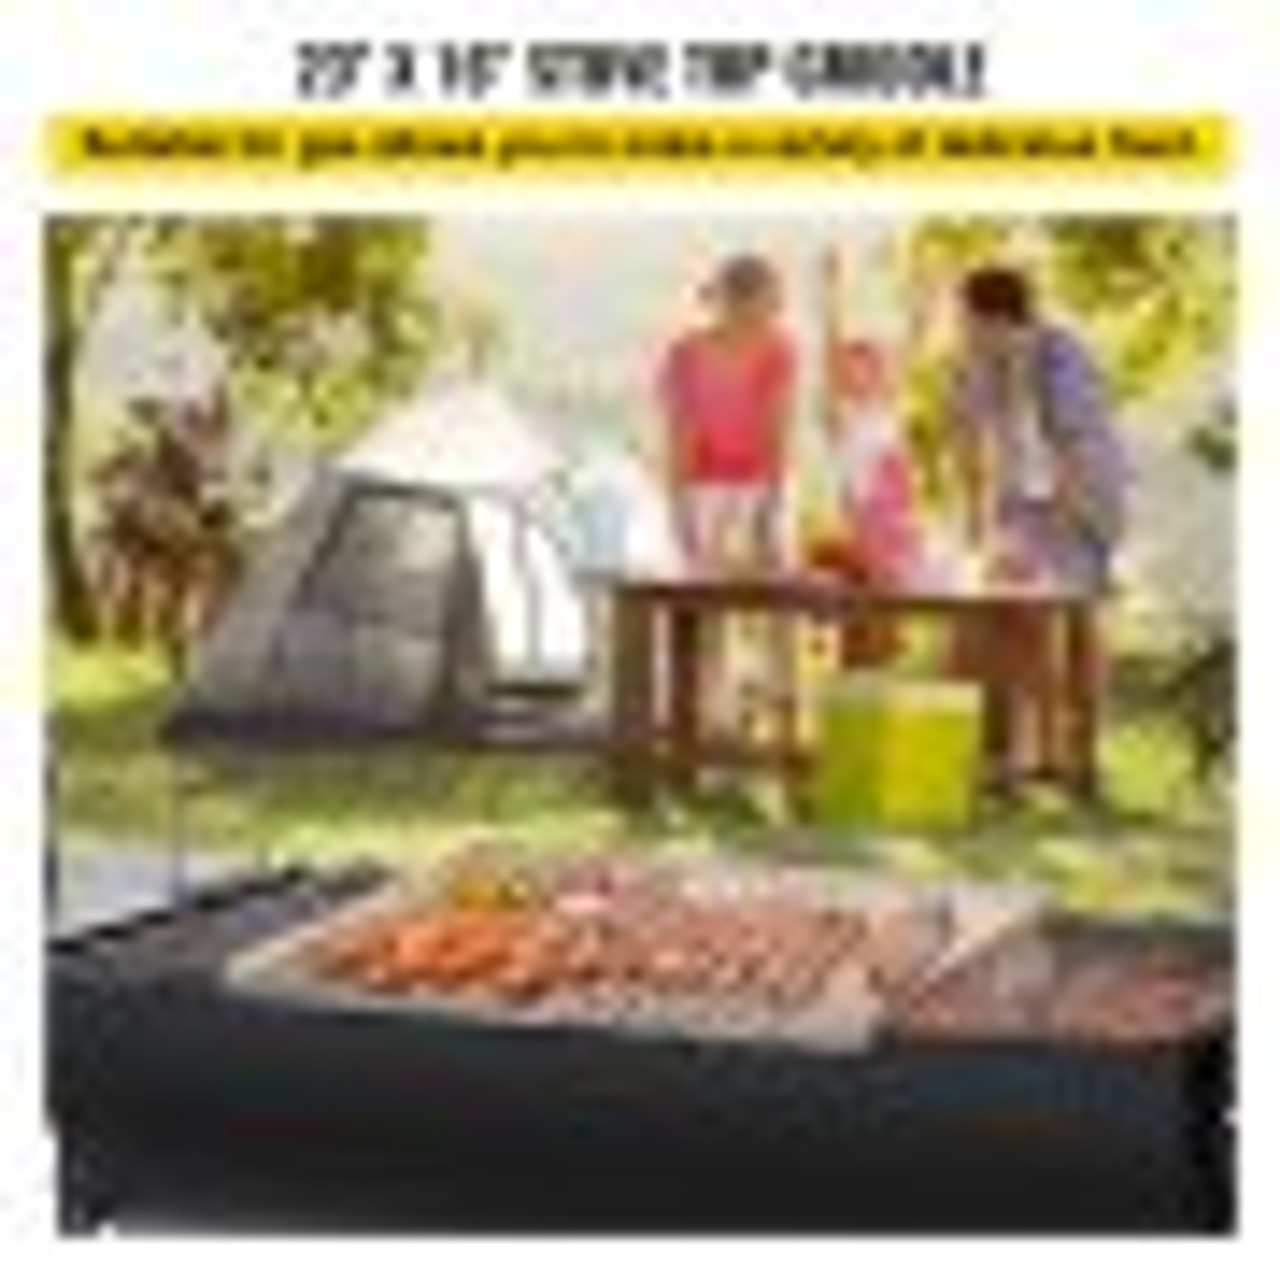 Stainless Steel Griddle, 23" x 16" Griddle Flat Top Plate, Griddle for BBQ Charcoal/Gas Gril with 2 Handles, Rectangular Flat Top Grill with Extra Drain Hole for Tailgating and Parties